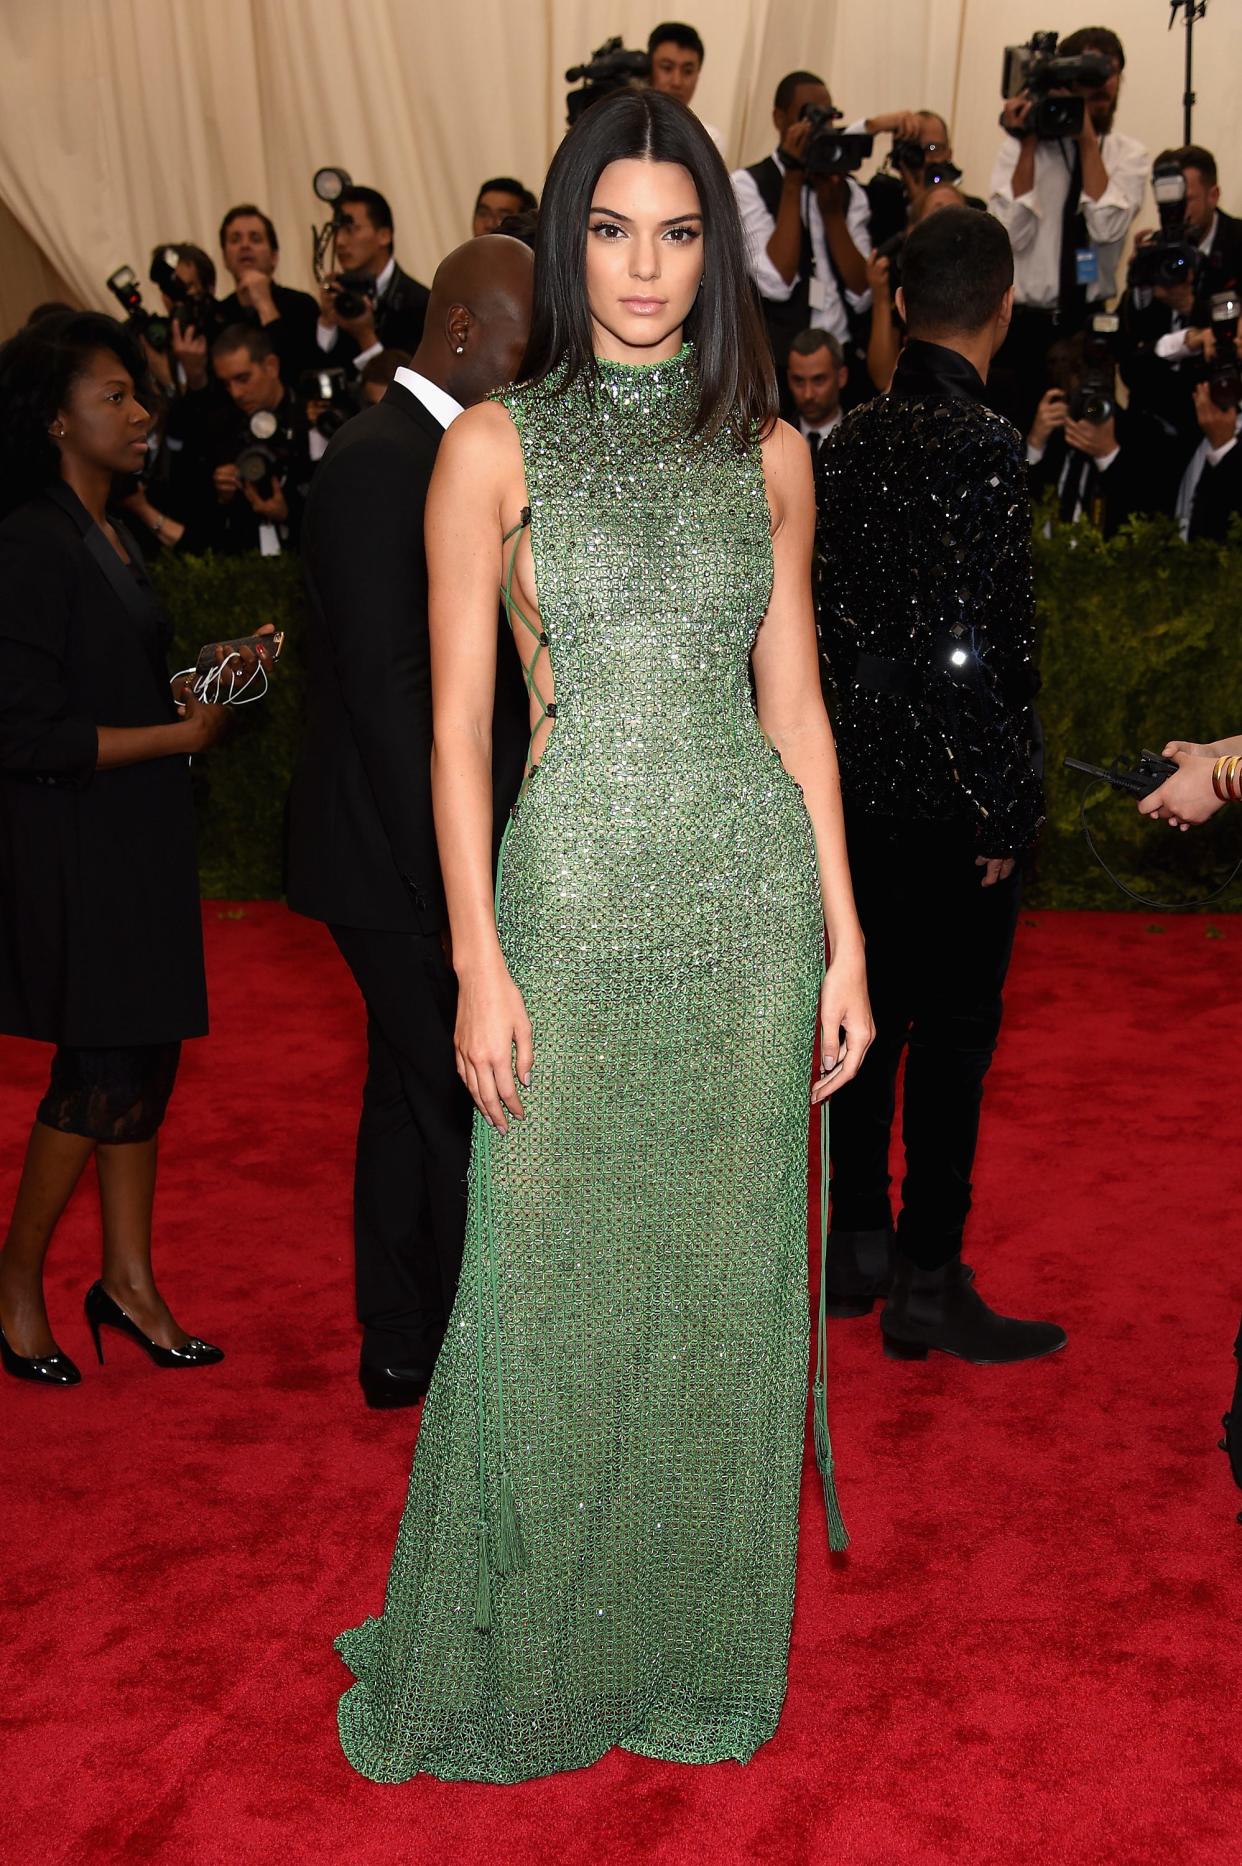 Kendall Jenner attends the 2015 Met Gala in a glittering green gown with exposed sides.